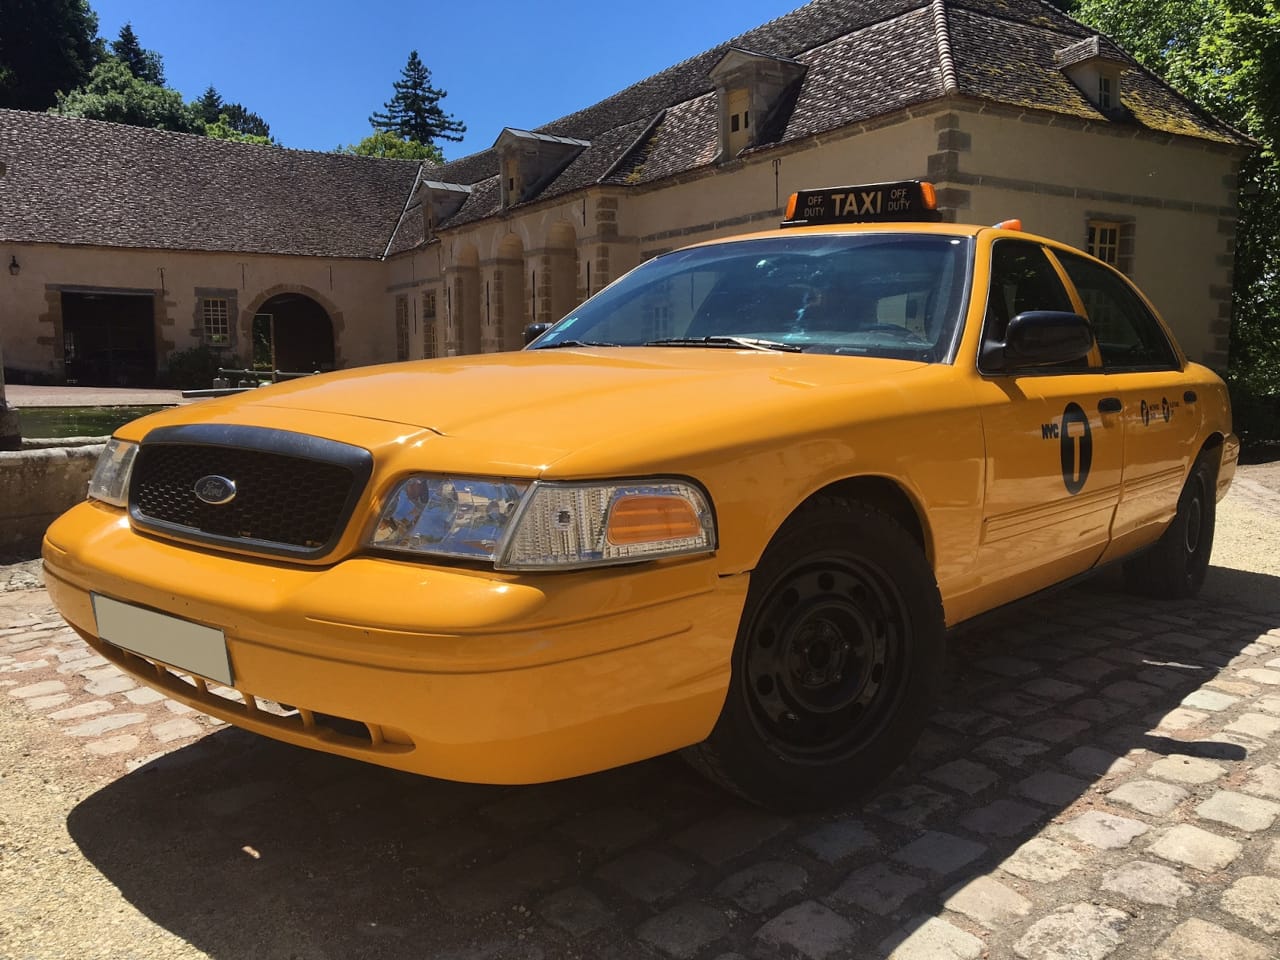 taxi new-yorkais yellow cab crown victoria